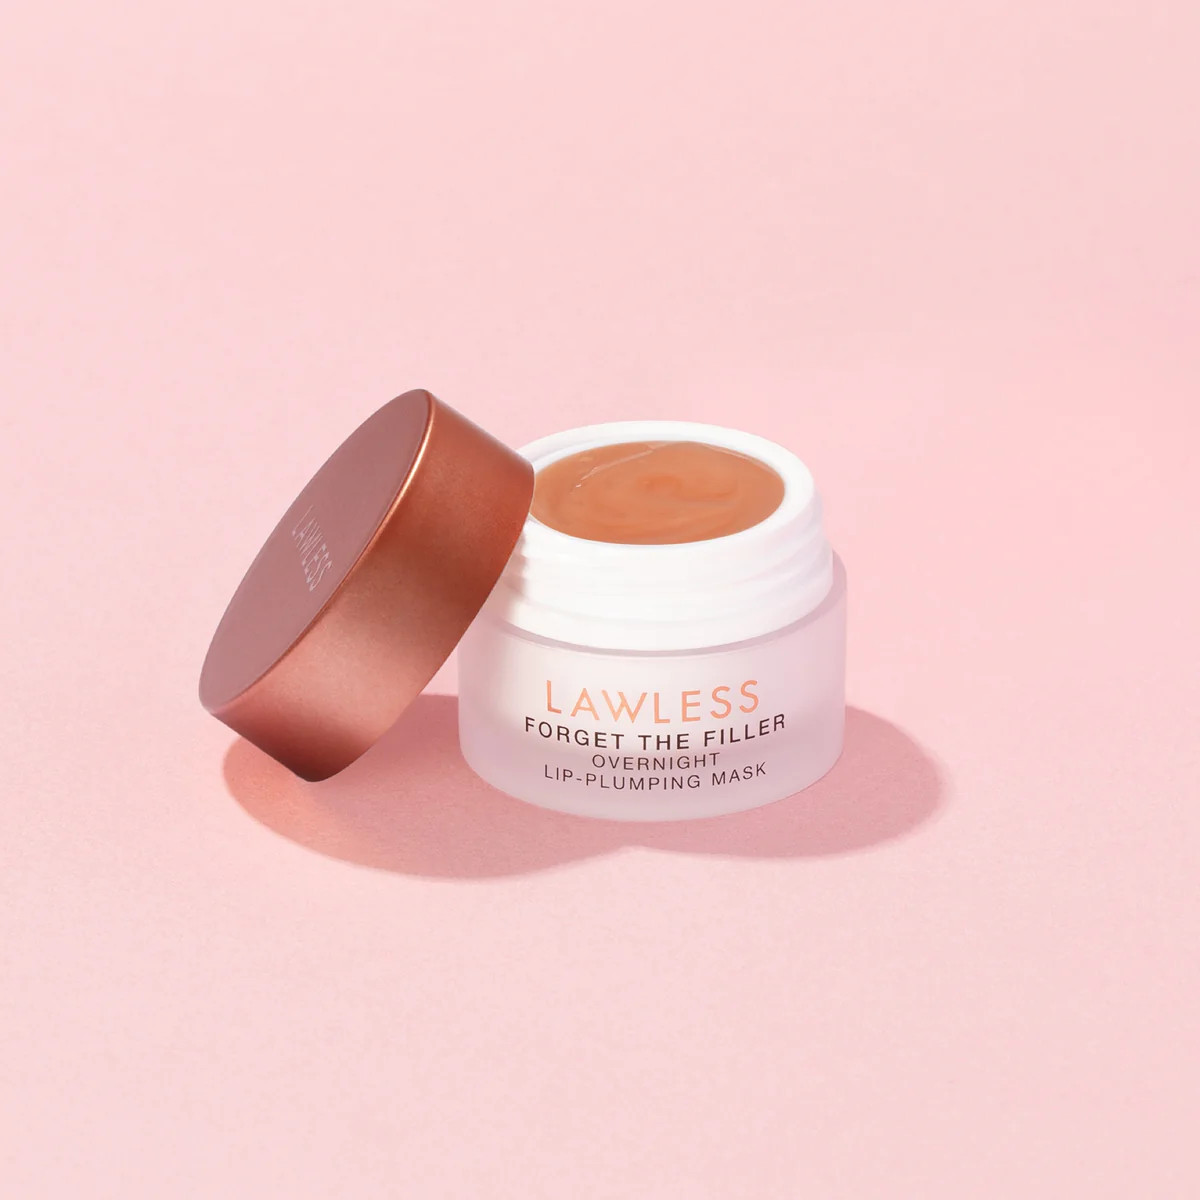 Forget the Filler Overnight Lip-Plumping Mask | Lawless Beauty | Lawless Beauty